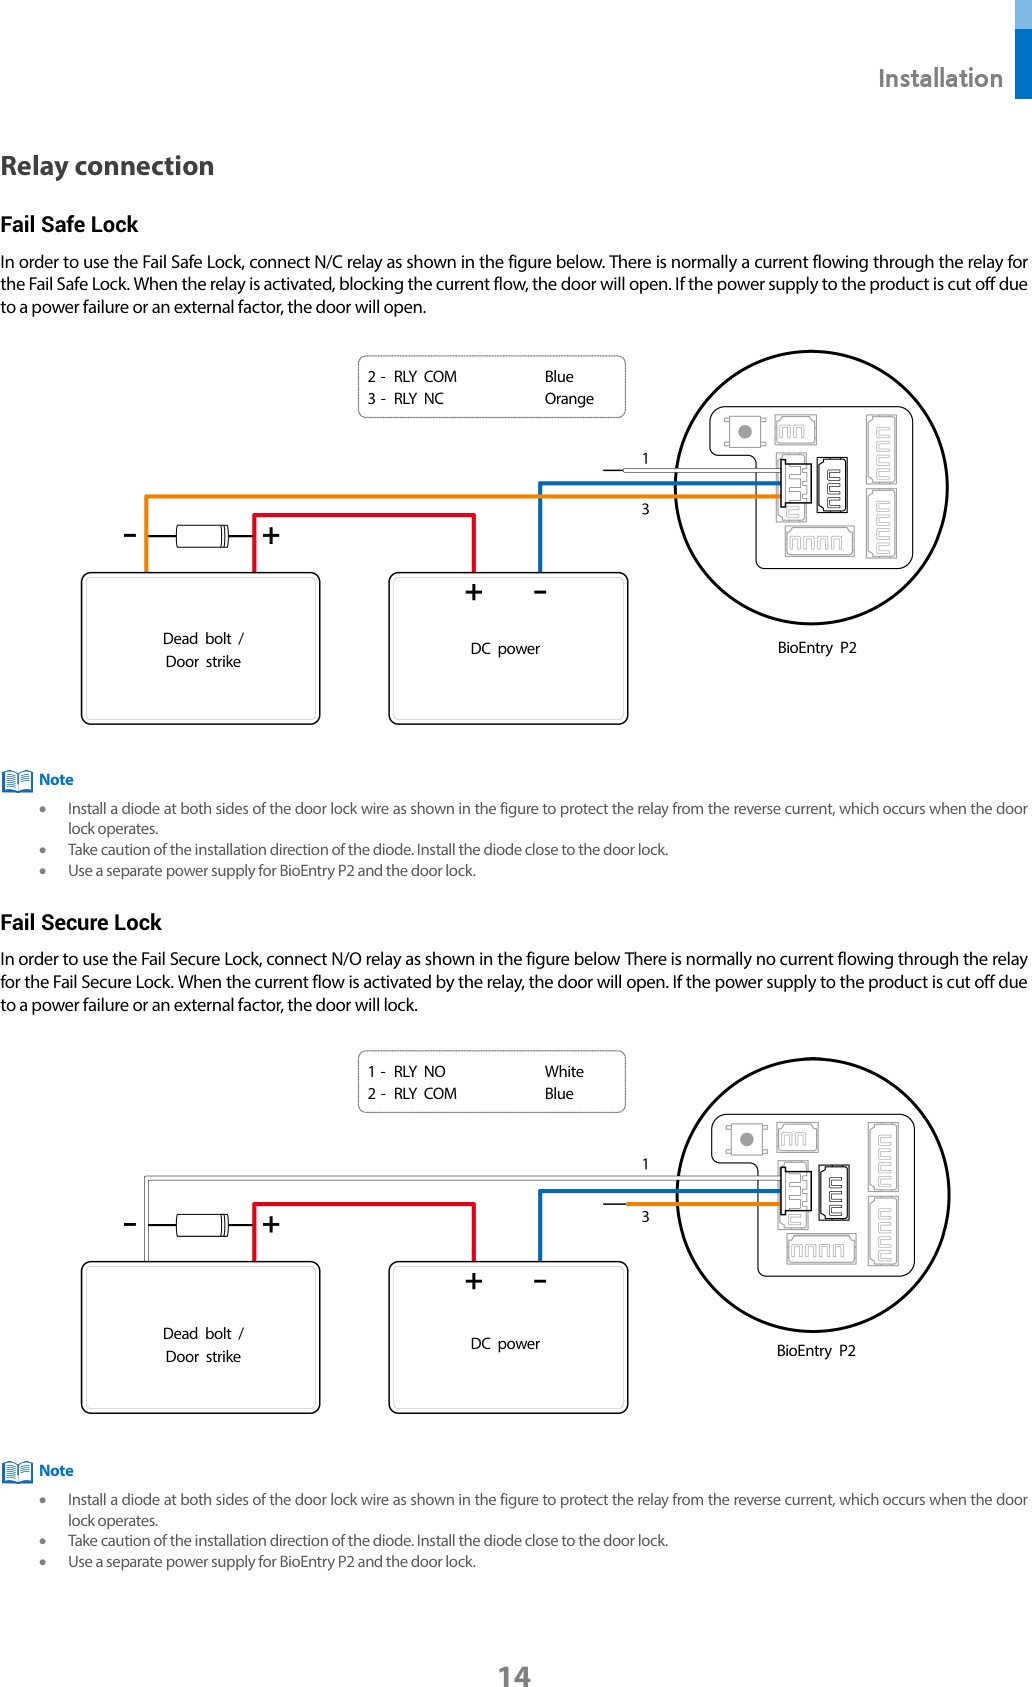 Tamper and Flow Switch Wiring Diagrams Lovely Bep2 Od Bioentry P2